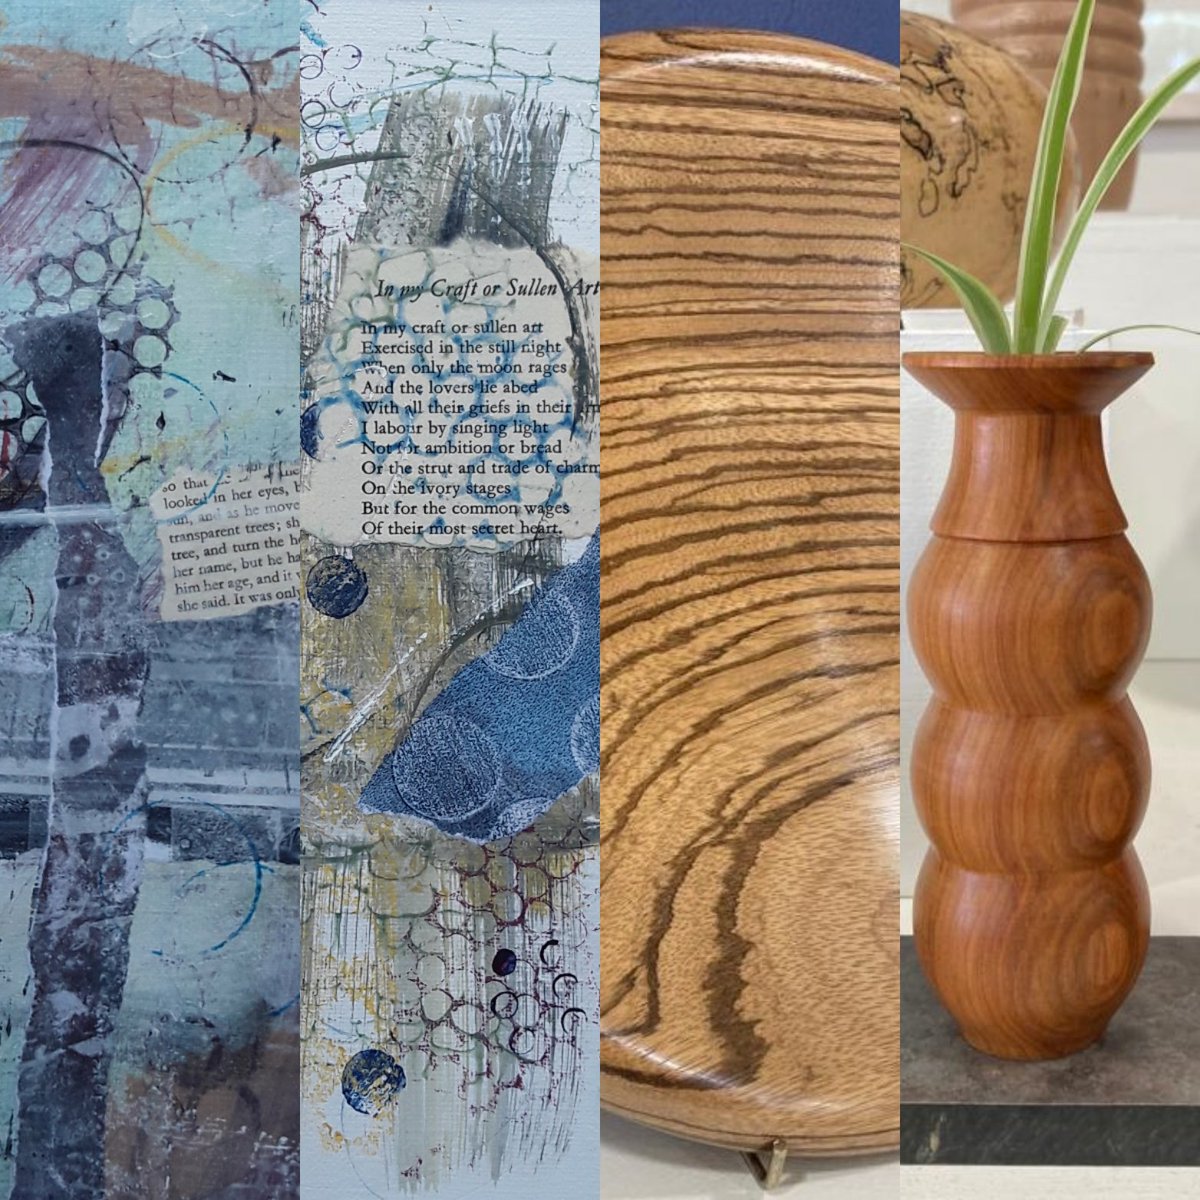 @herefordshireartweek is off to a flying start at venue 23 Kim and Maggie Davis wood turning and mixed media, @KWDturning @VisitHfds @Leominstertic @EatSleepLiveHfd @aloejaney @tweethrfdshire @MarchesHour @HerefordHourbiz @LocalToHereford @Made_in_HR6